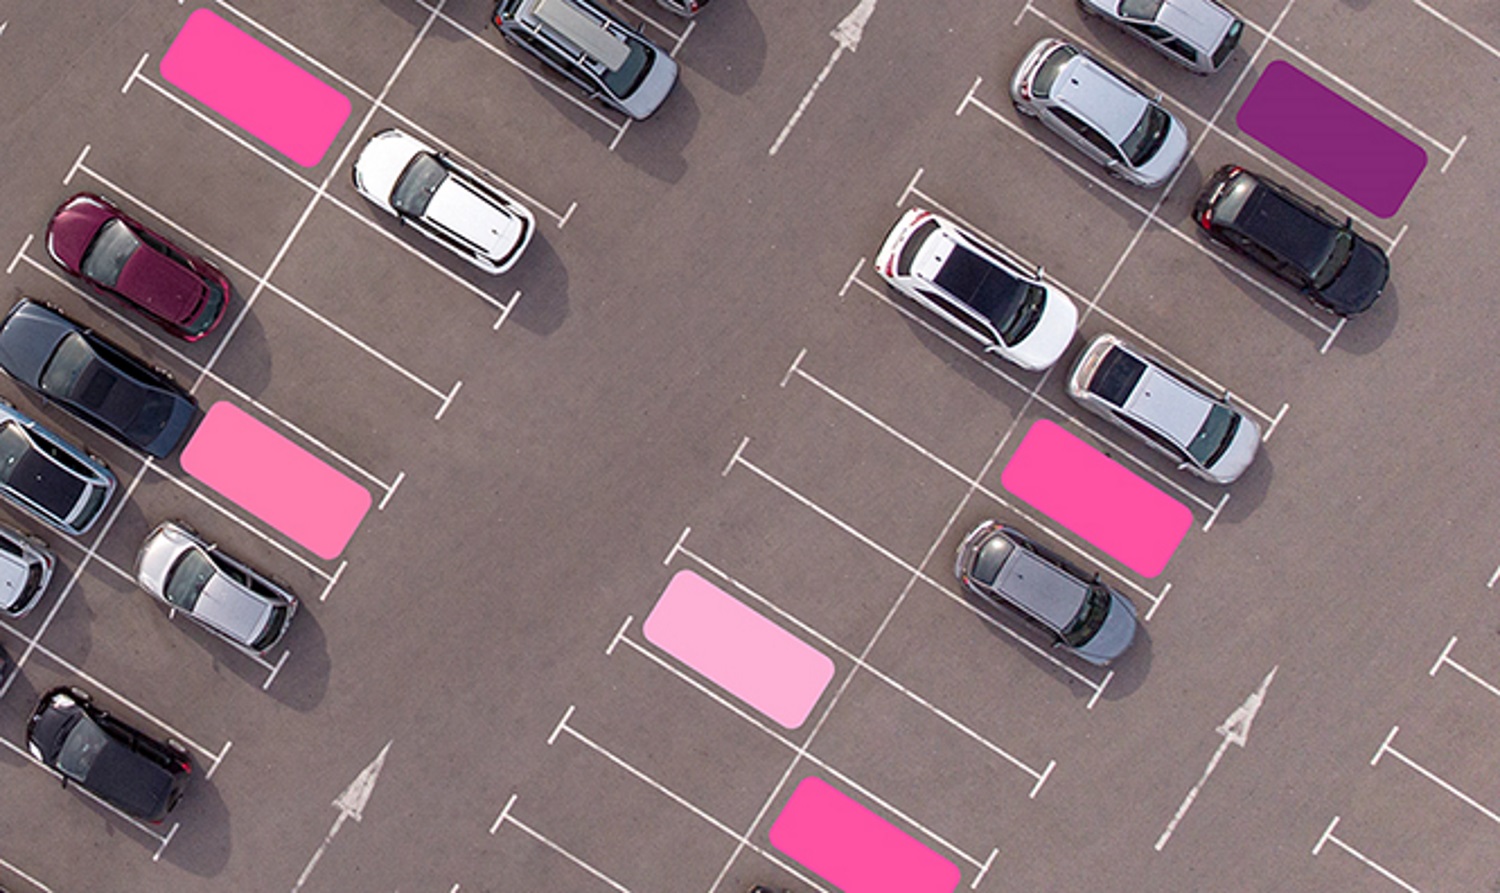  EasyPark Group continues to grow and strengthen the position as the parking tech company with the widest coverage in the world.